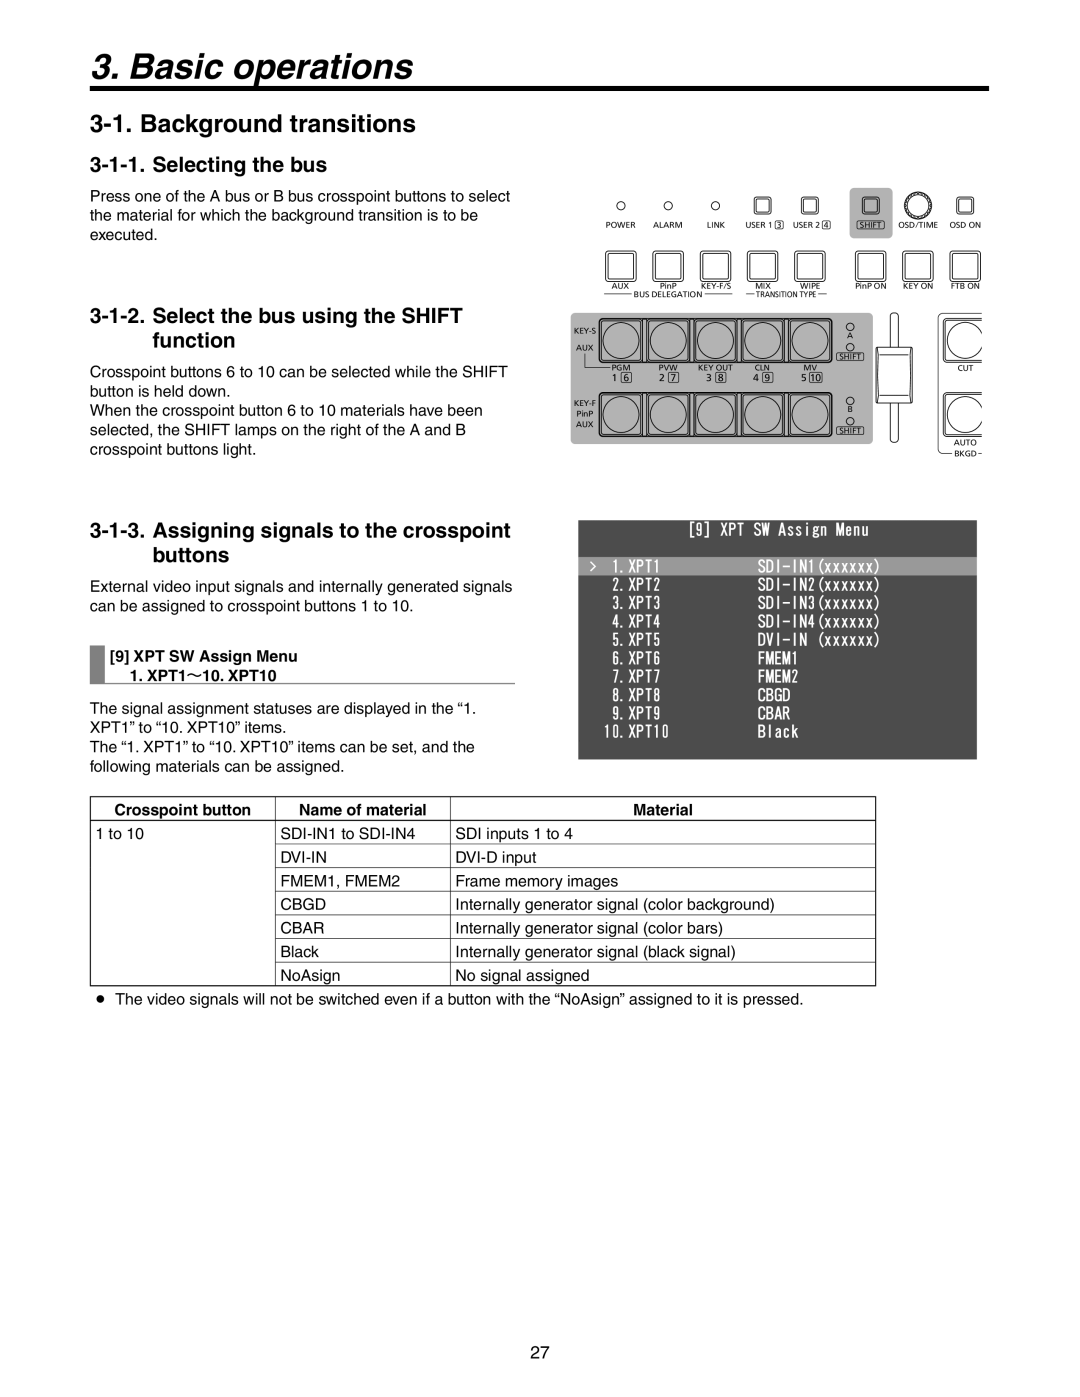 Panasonic AW-HS50N Basic operations, Background transitions, Selecting the bus, Select the bus using the SHIFT function 